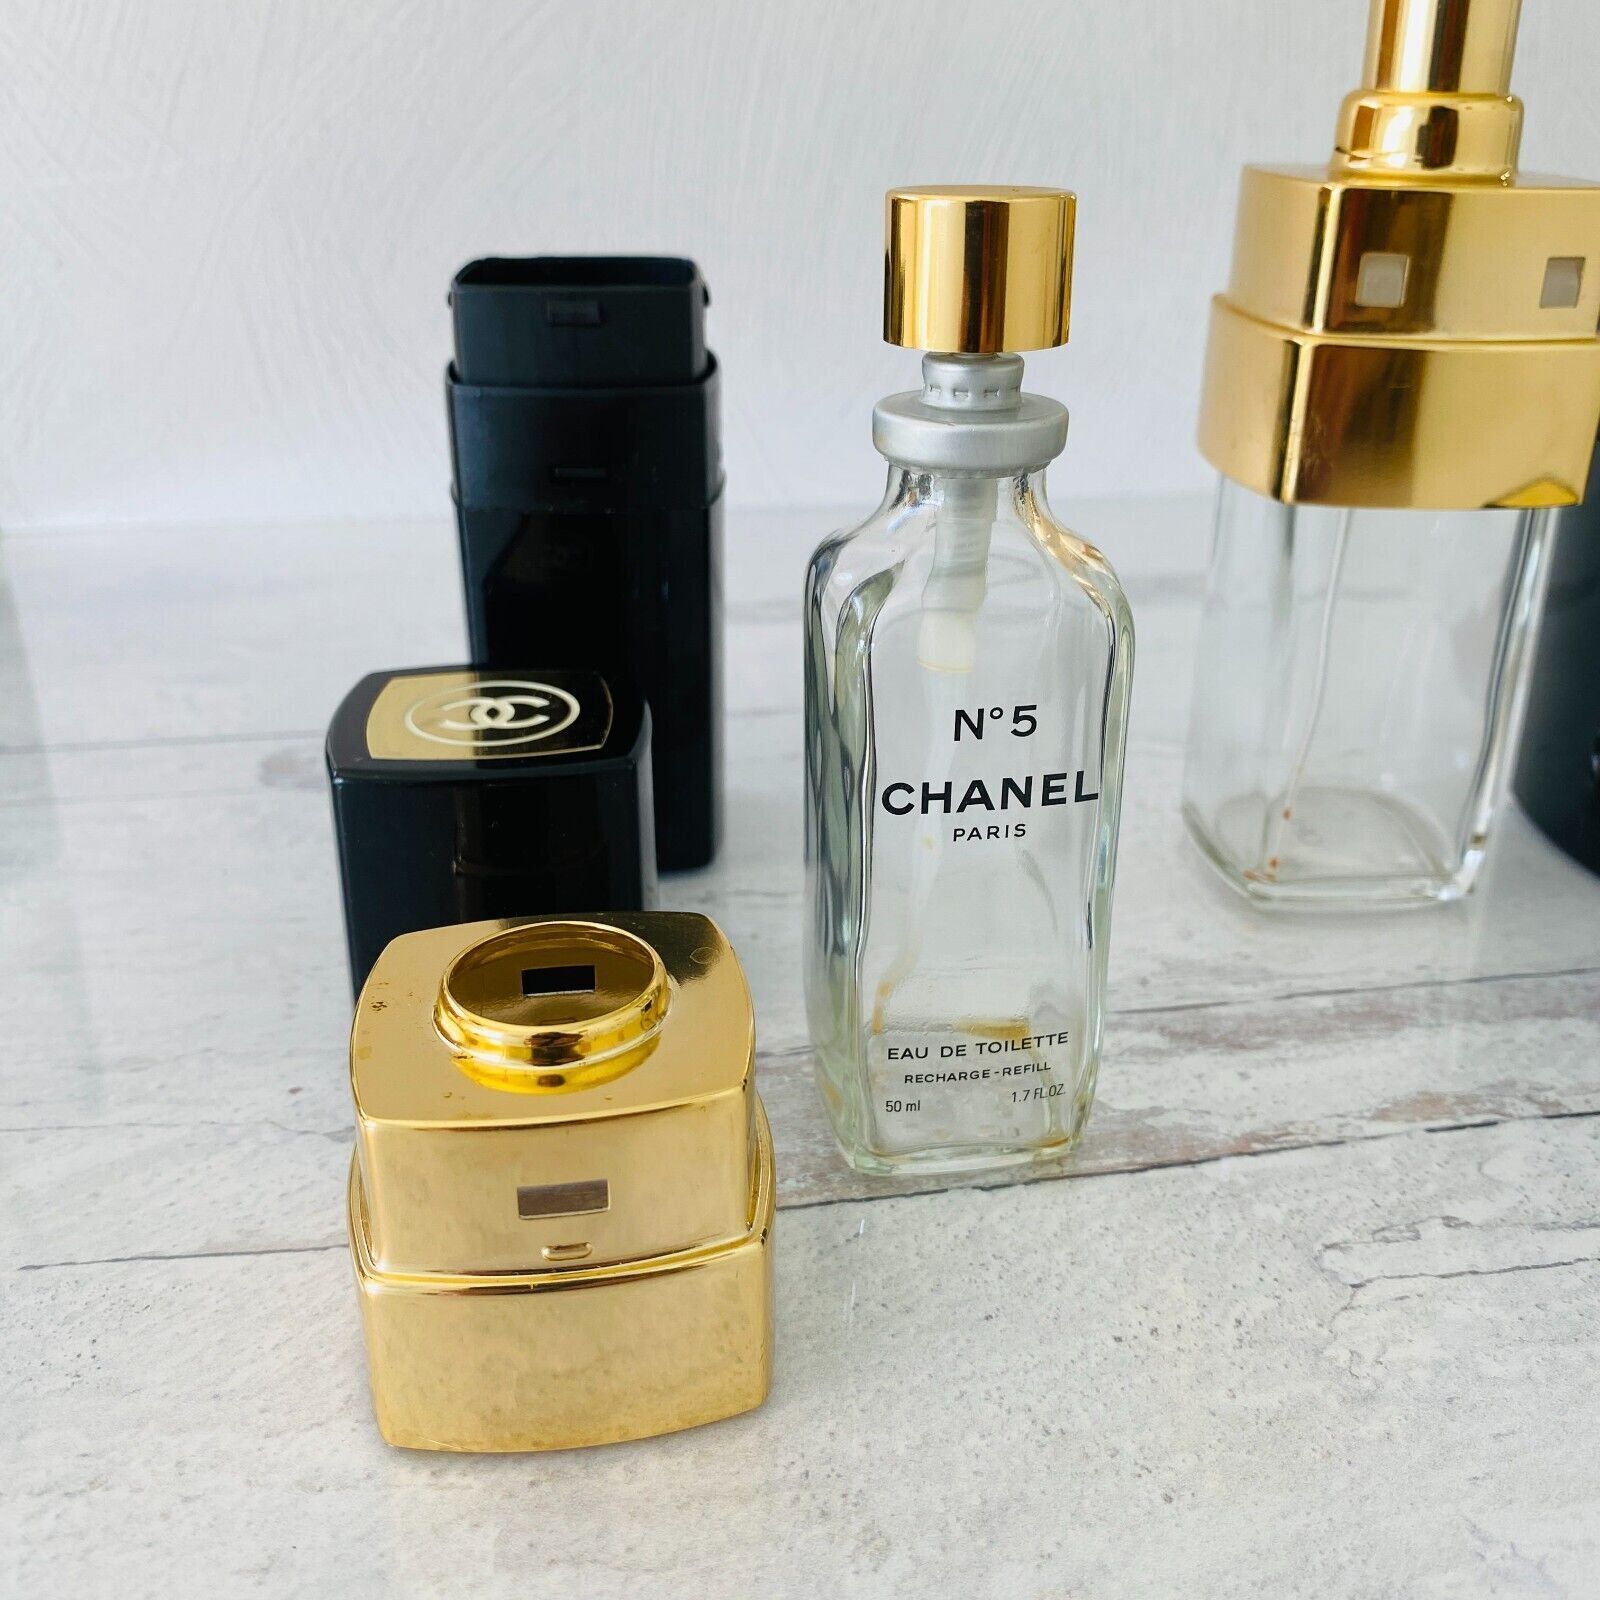 Chanel Number 5 Parfum Bottles Black Gold Refill Replace Decorate 1.7 and 3.4 Oz